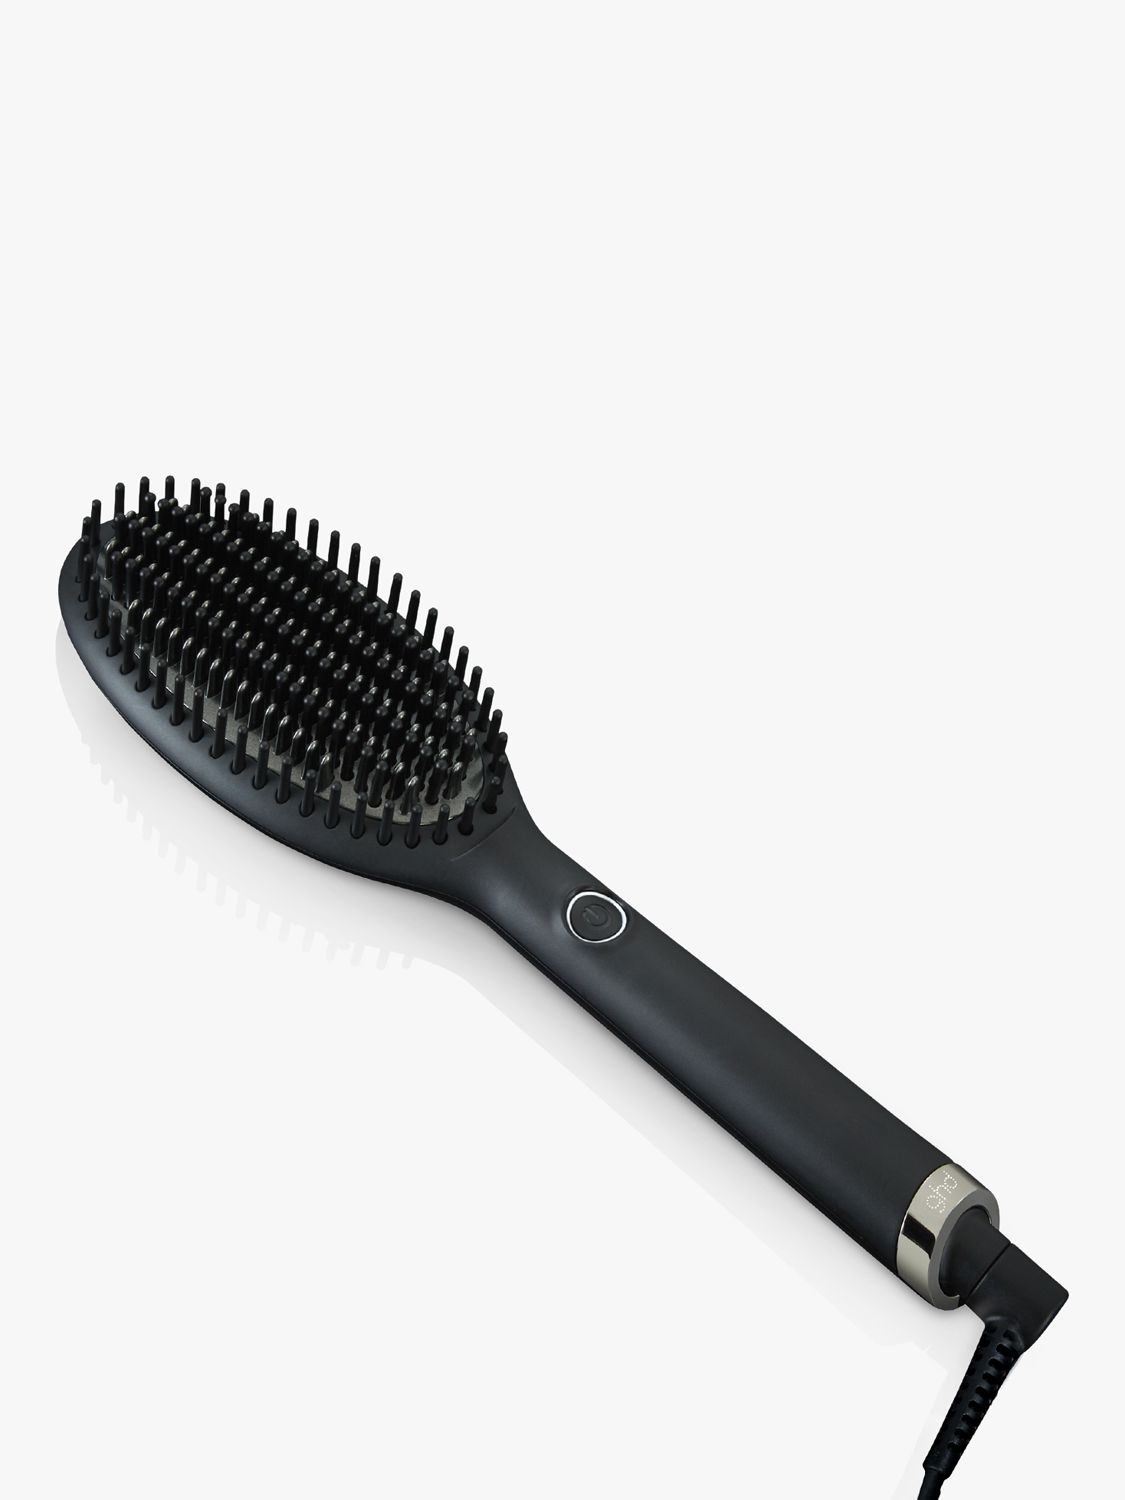 I tried the jade comb for two weeks and this is what happened